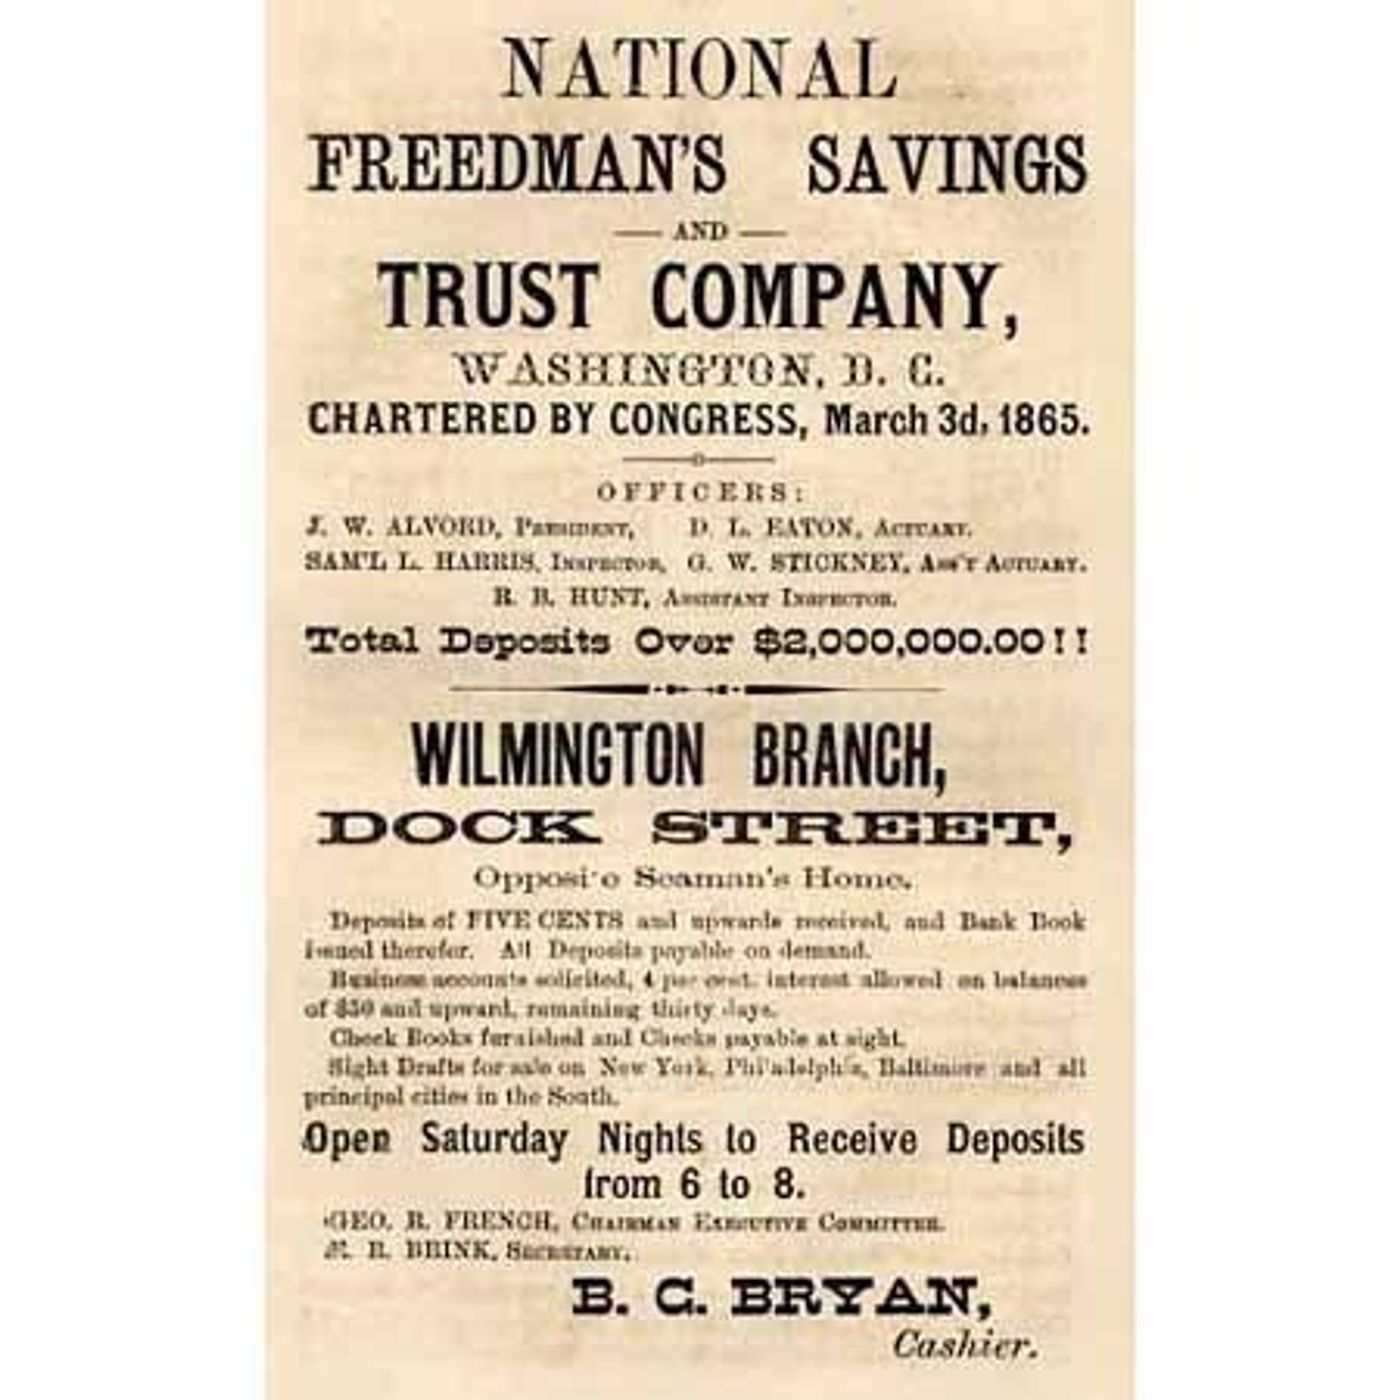 S4 Ep44: Married to a Corpse: Episode 44 (The story of the Freedman's Savings Bank)